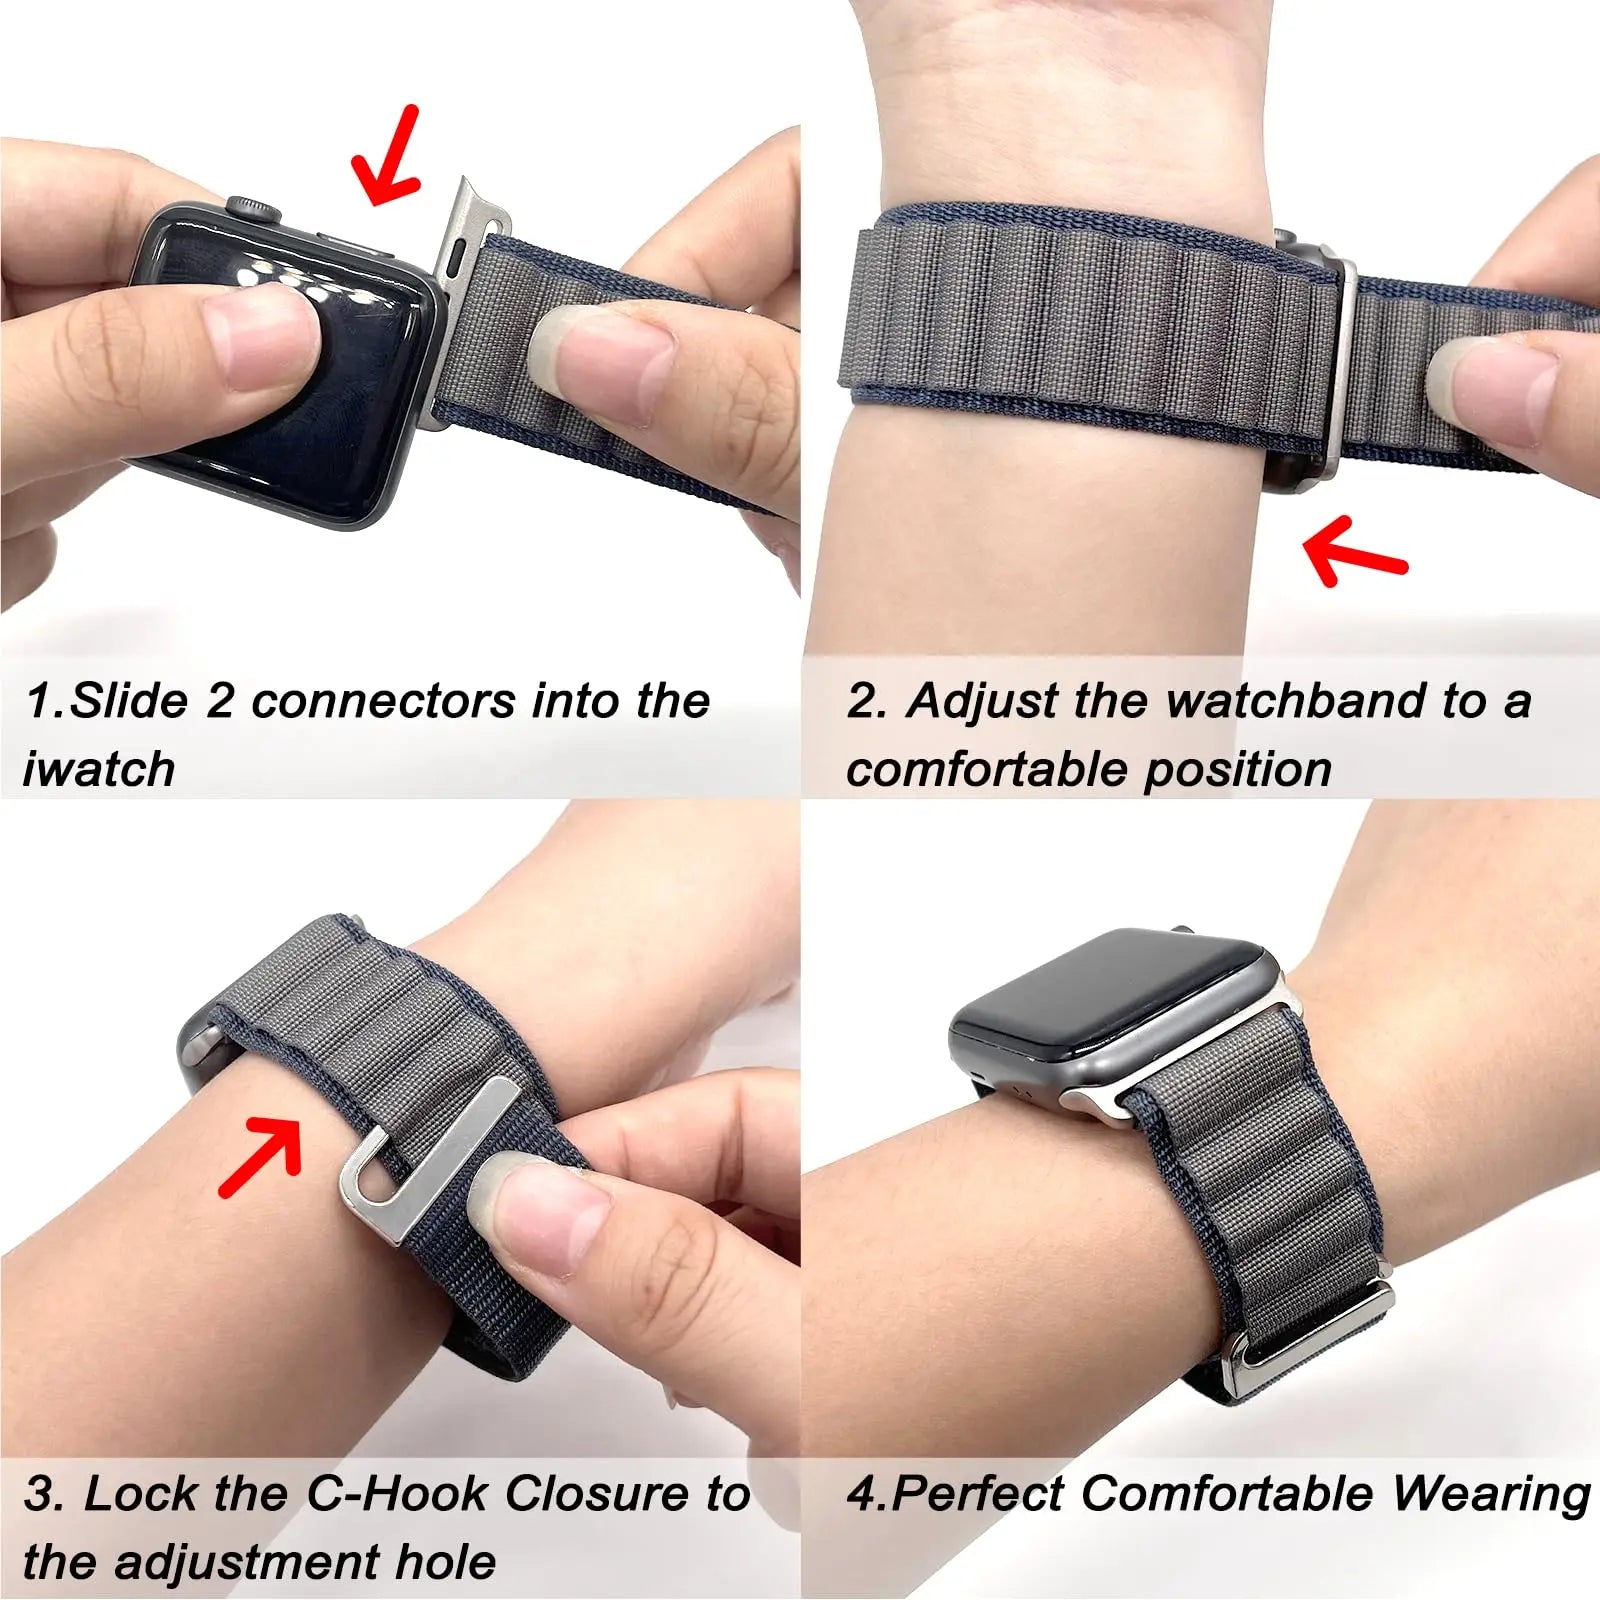 Alpine Loop Strap for Apple Watch - Stylish Metal C-Hook Bracelet - Compatible with iWatch SE, Series 9-3 (49mm-40mm)